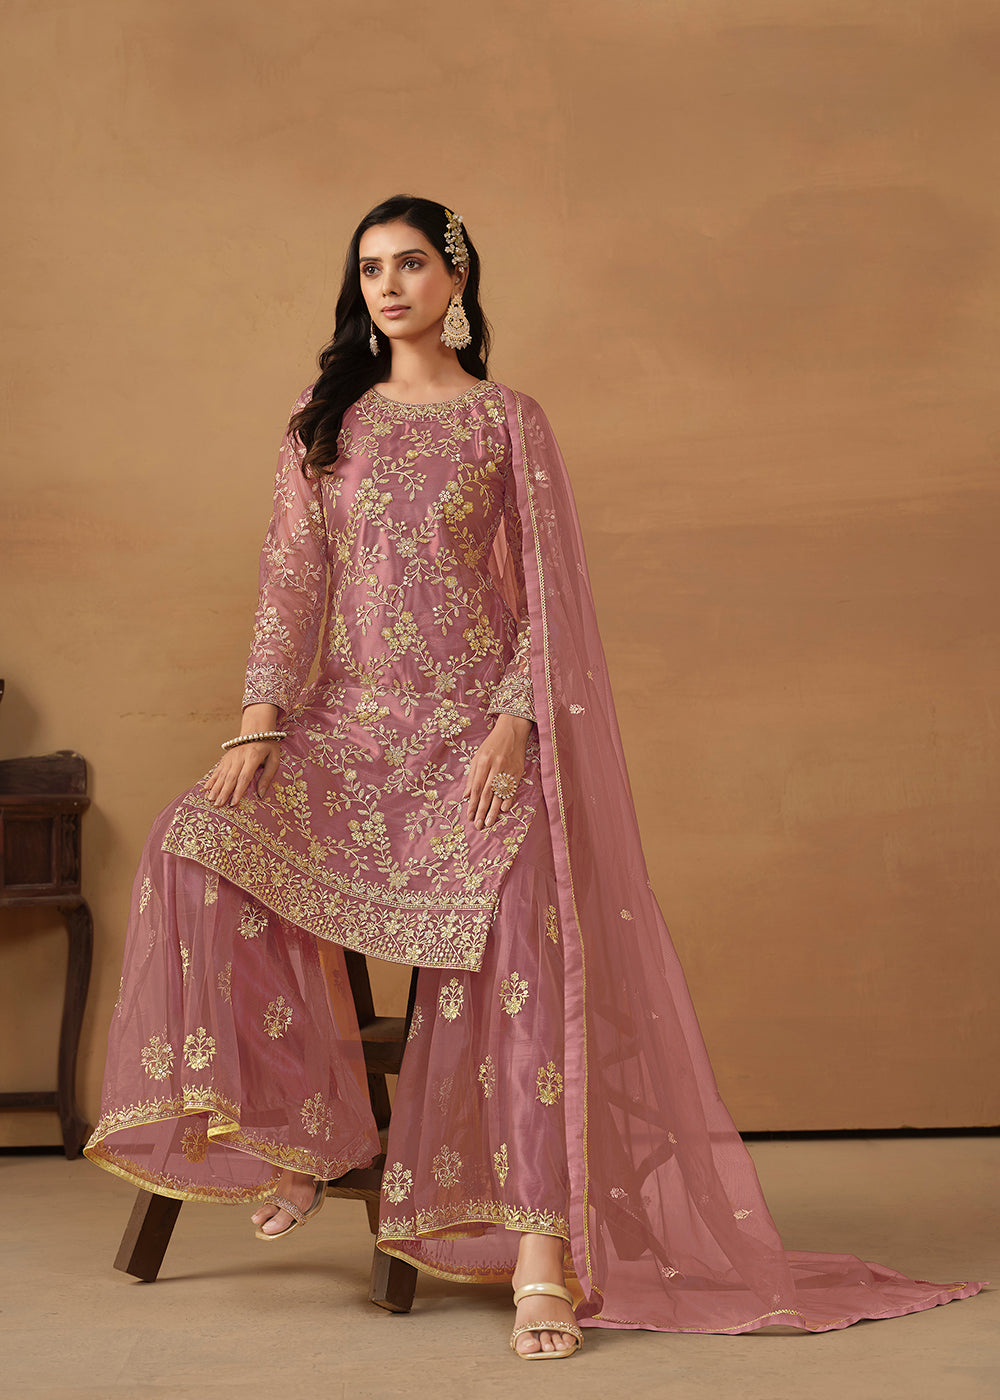 Shop Now Old Rose Net Embroidered Wedding Festive Gharara Suit Online at Empress Clothing in USA, UK, Canada, Italy & Worldwide.